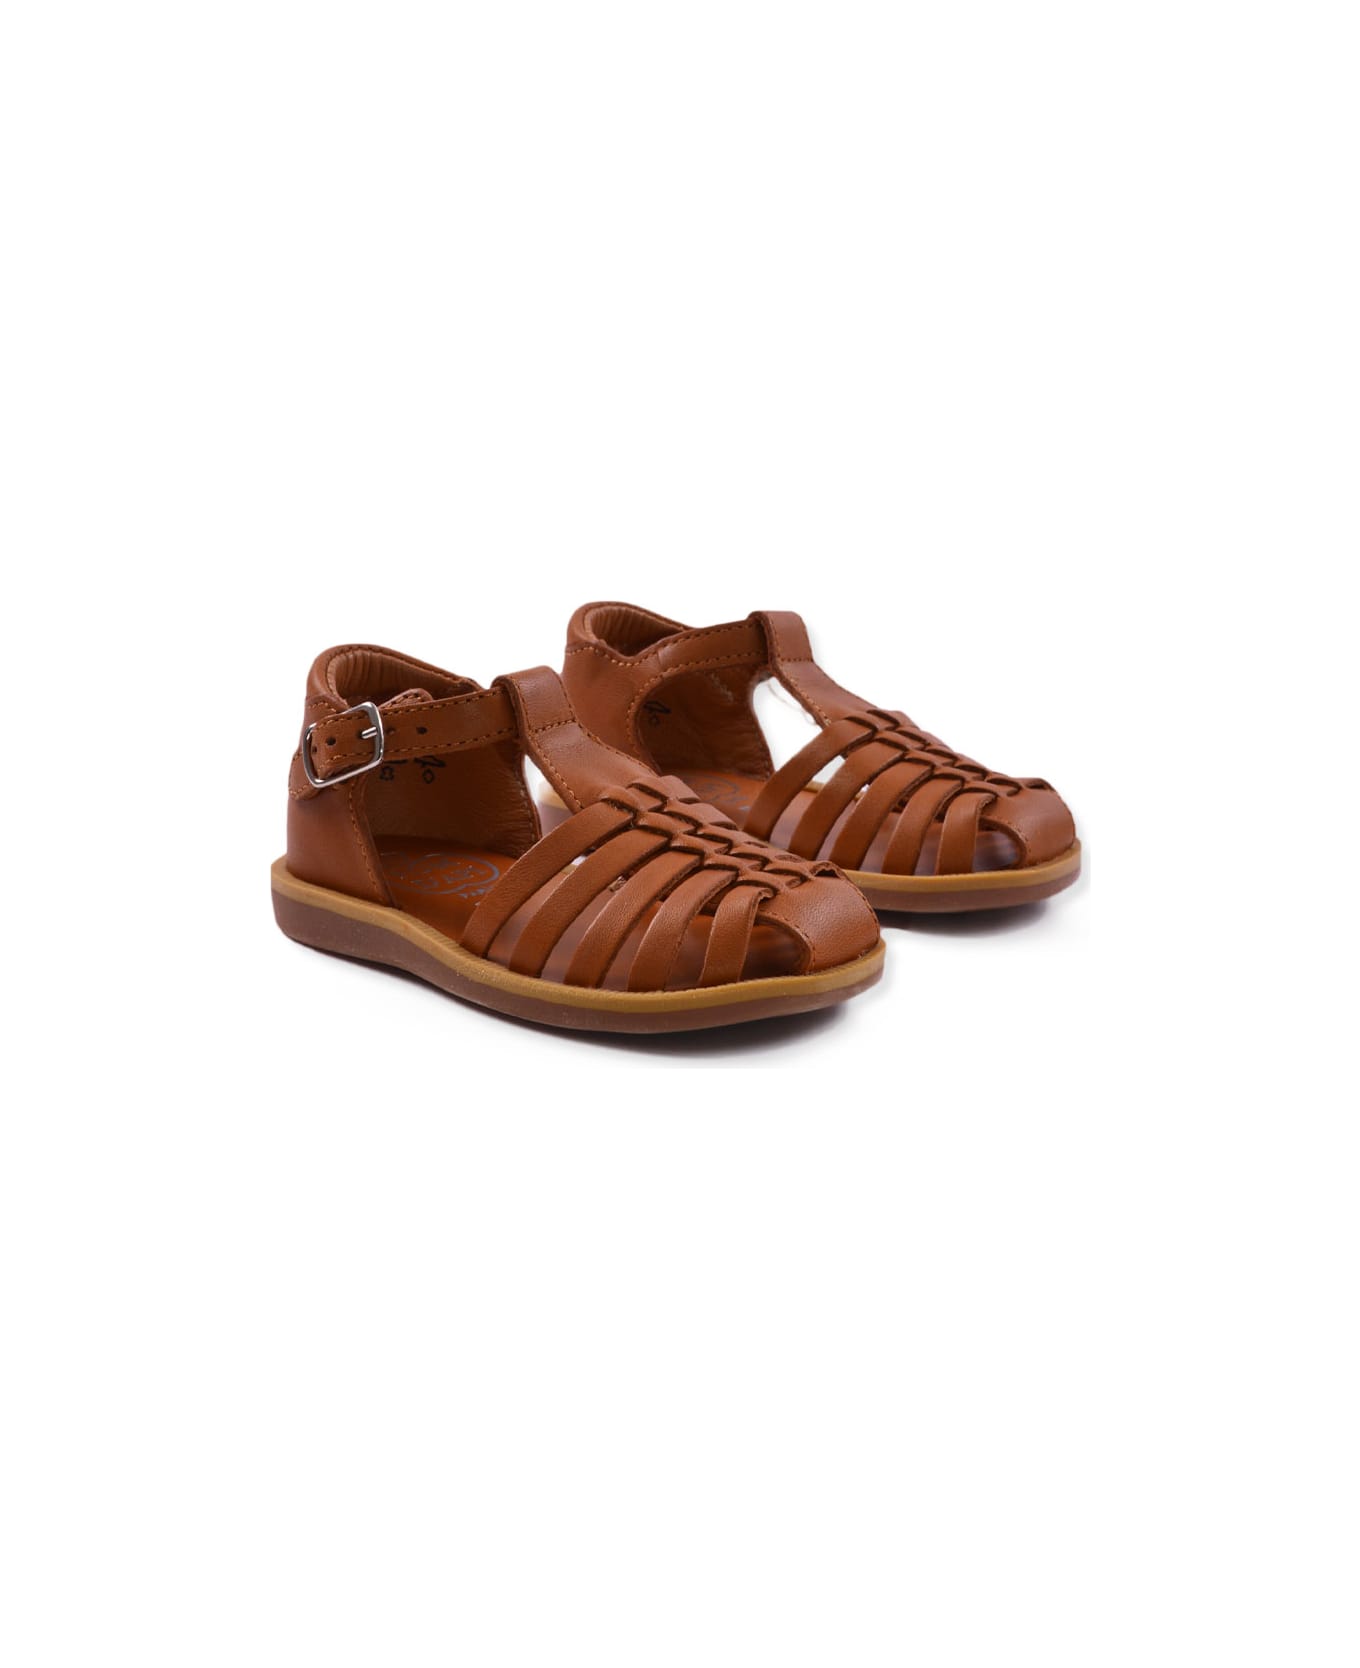 Pom d'Api Sandals In Smooth Leather - Brown